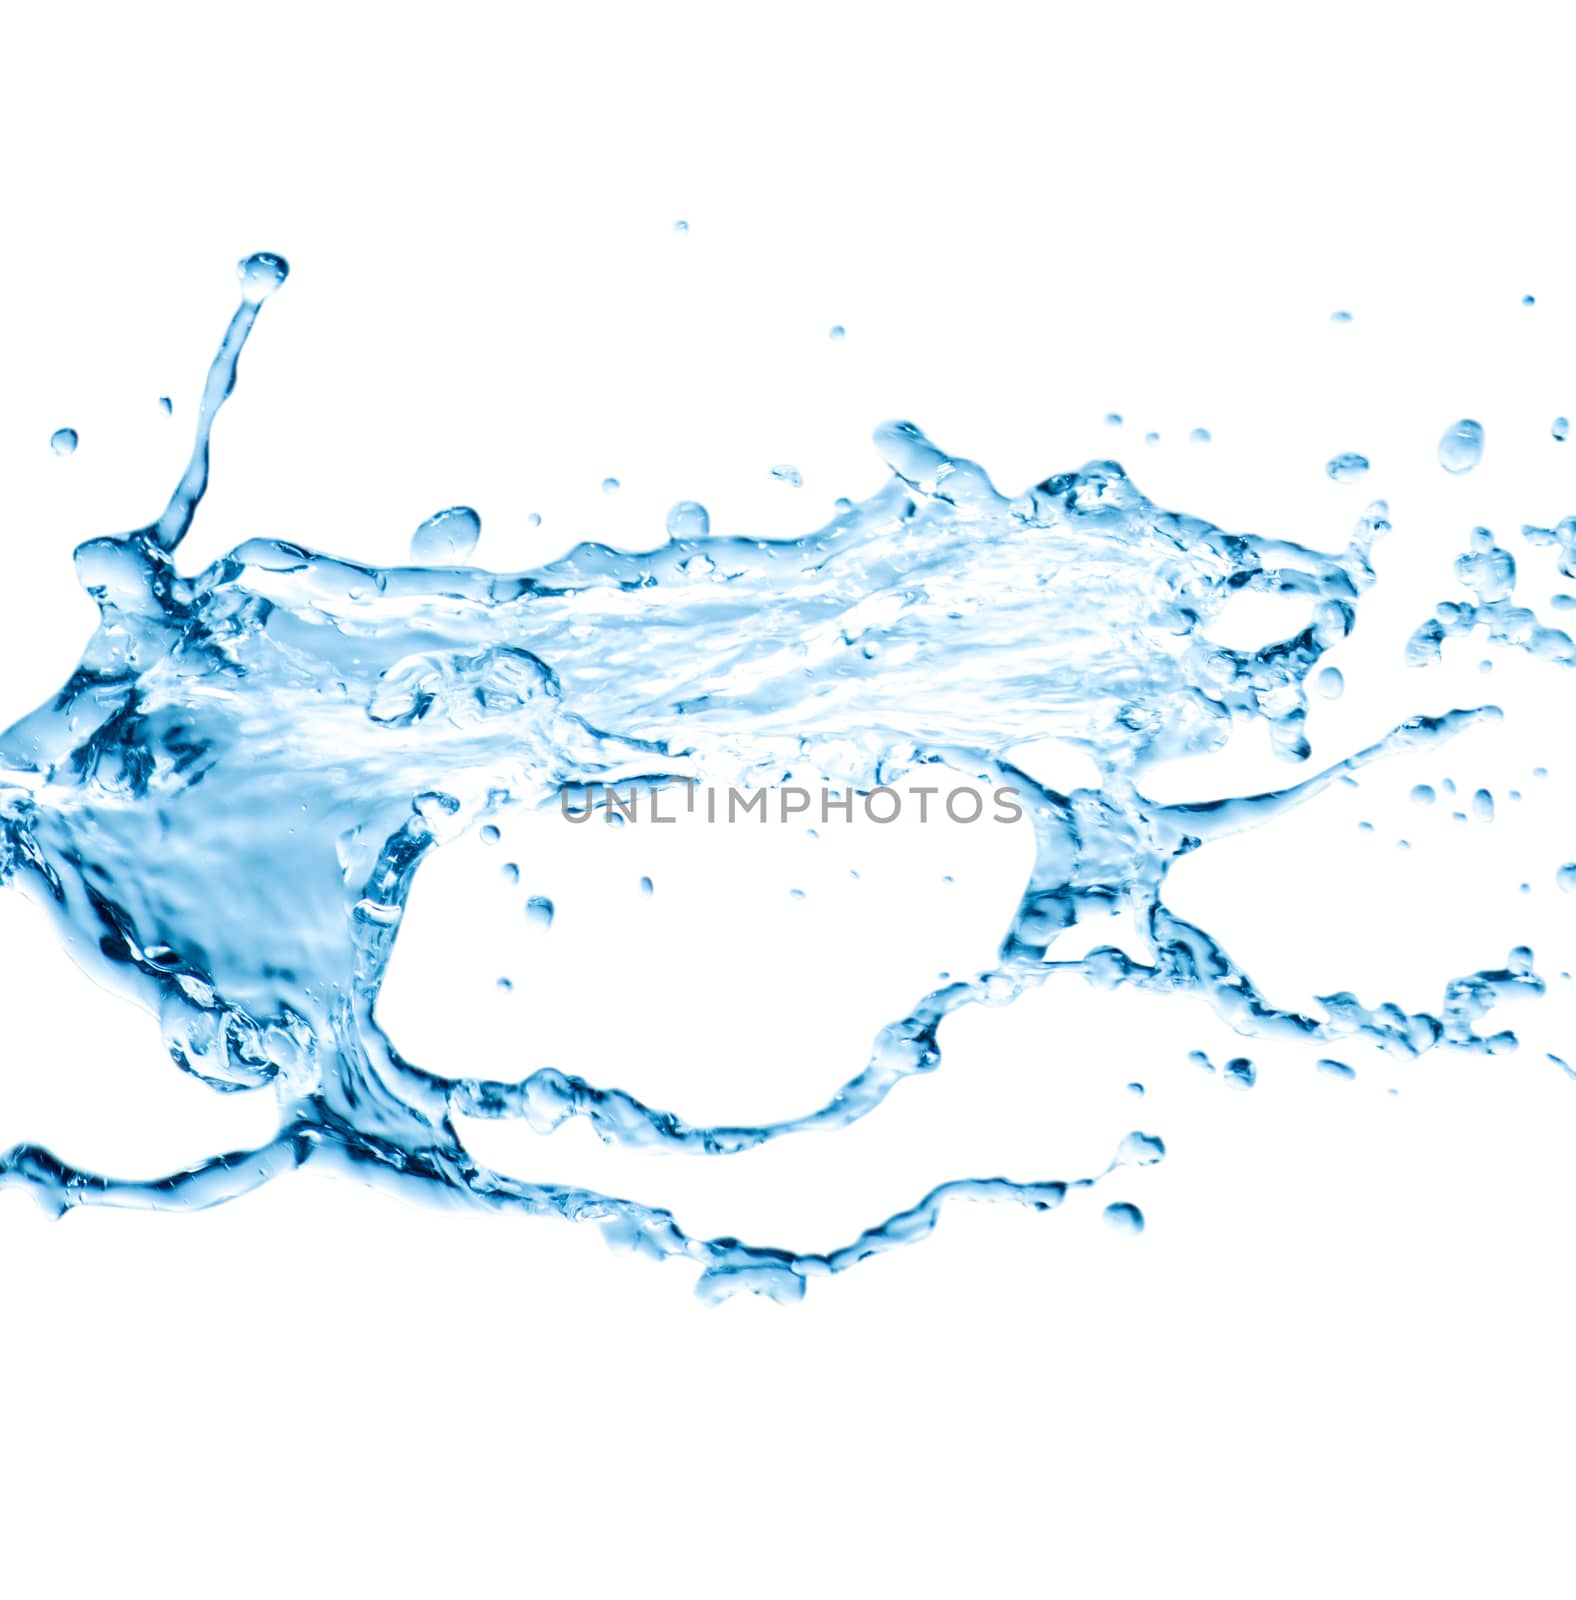 splashes of water isolated on a white background